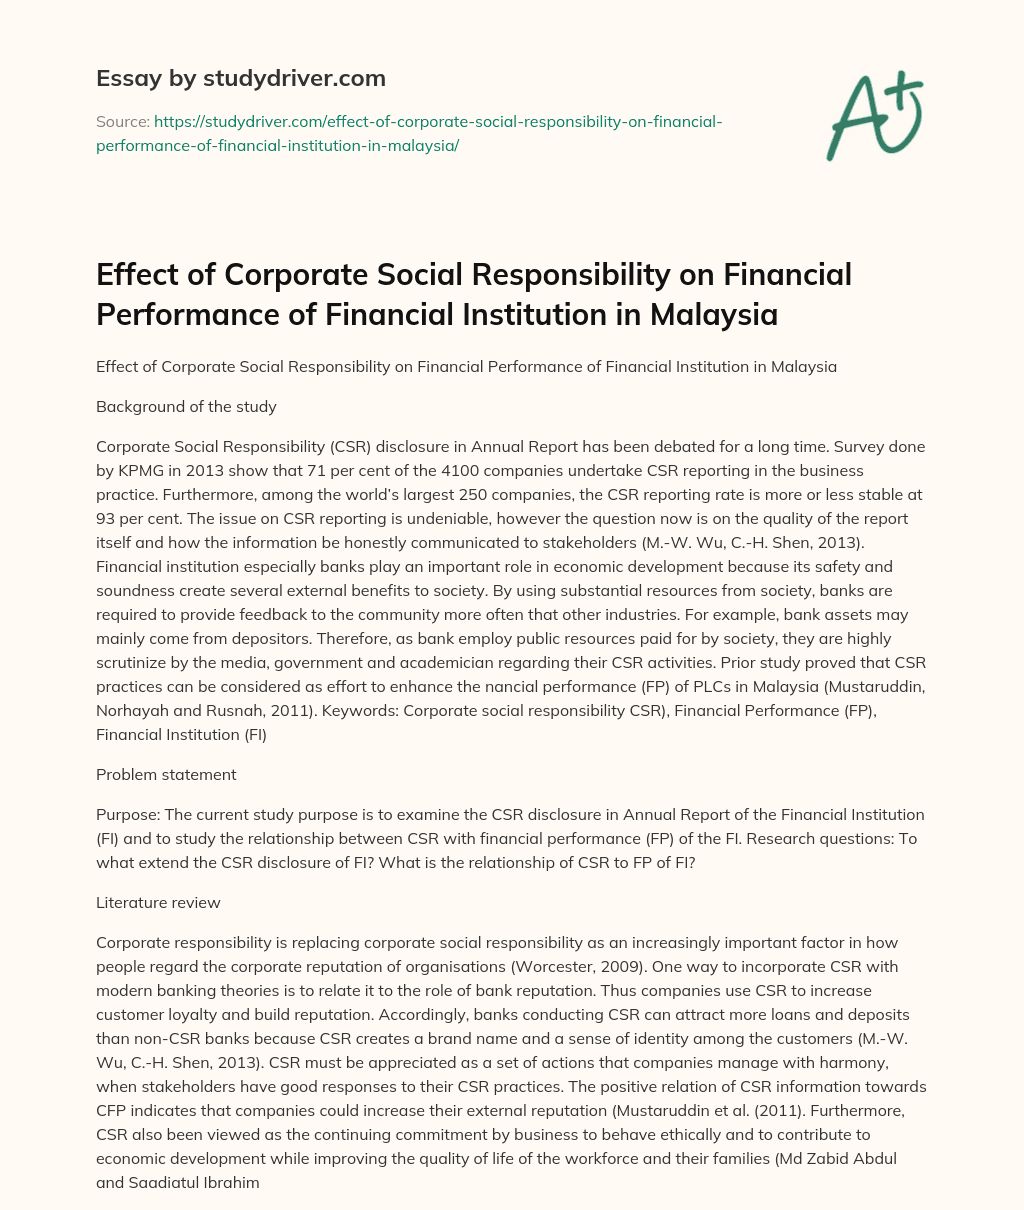 Effect of Corporate Social Responsibility on Financial Performance of Financial Institution in Malaysia essay